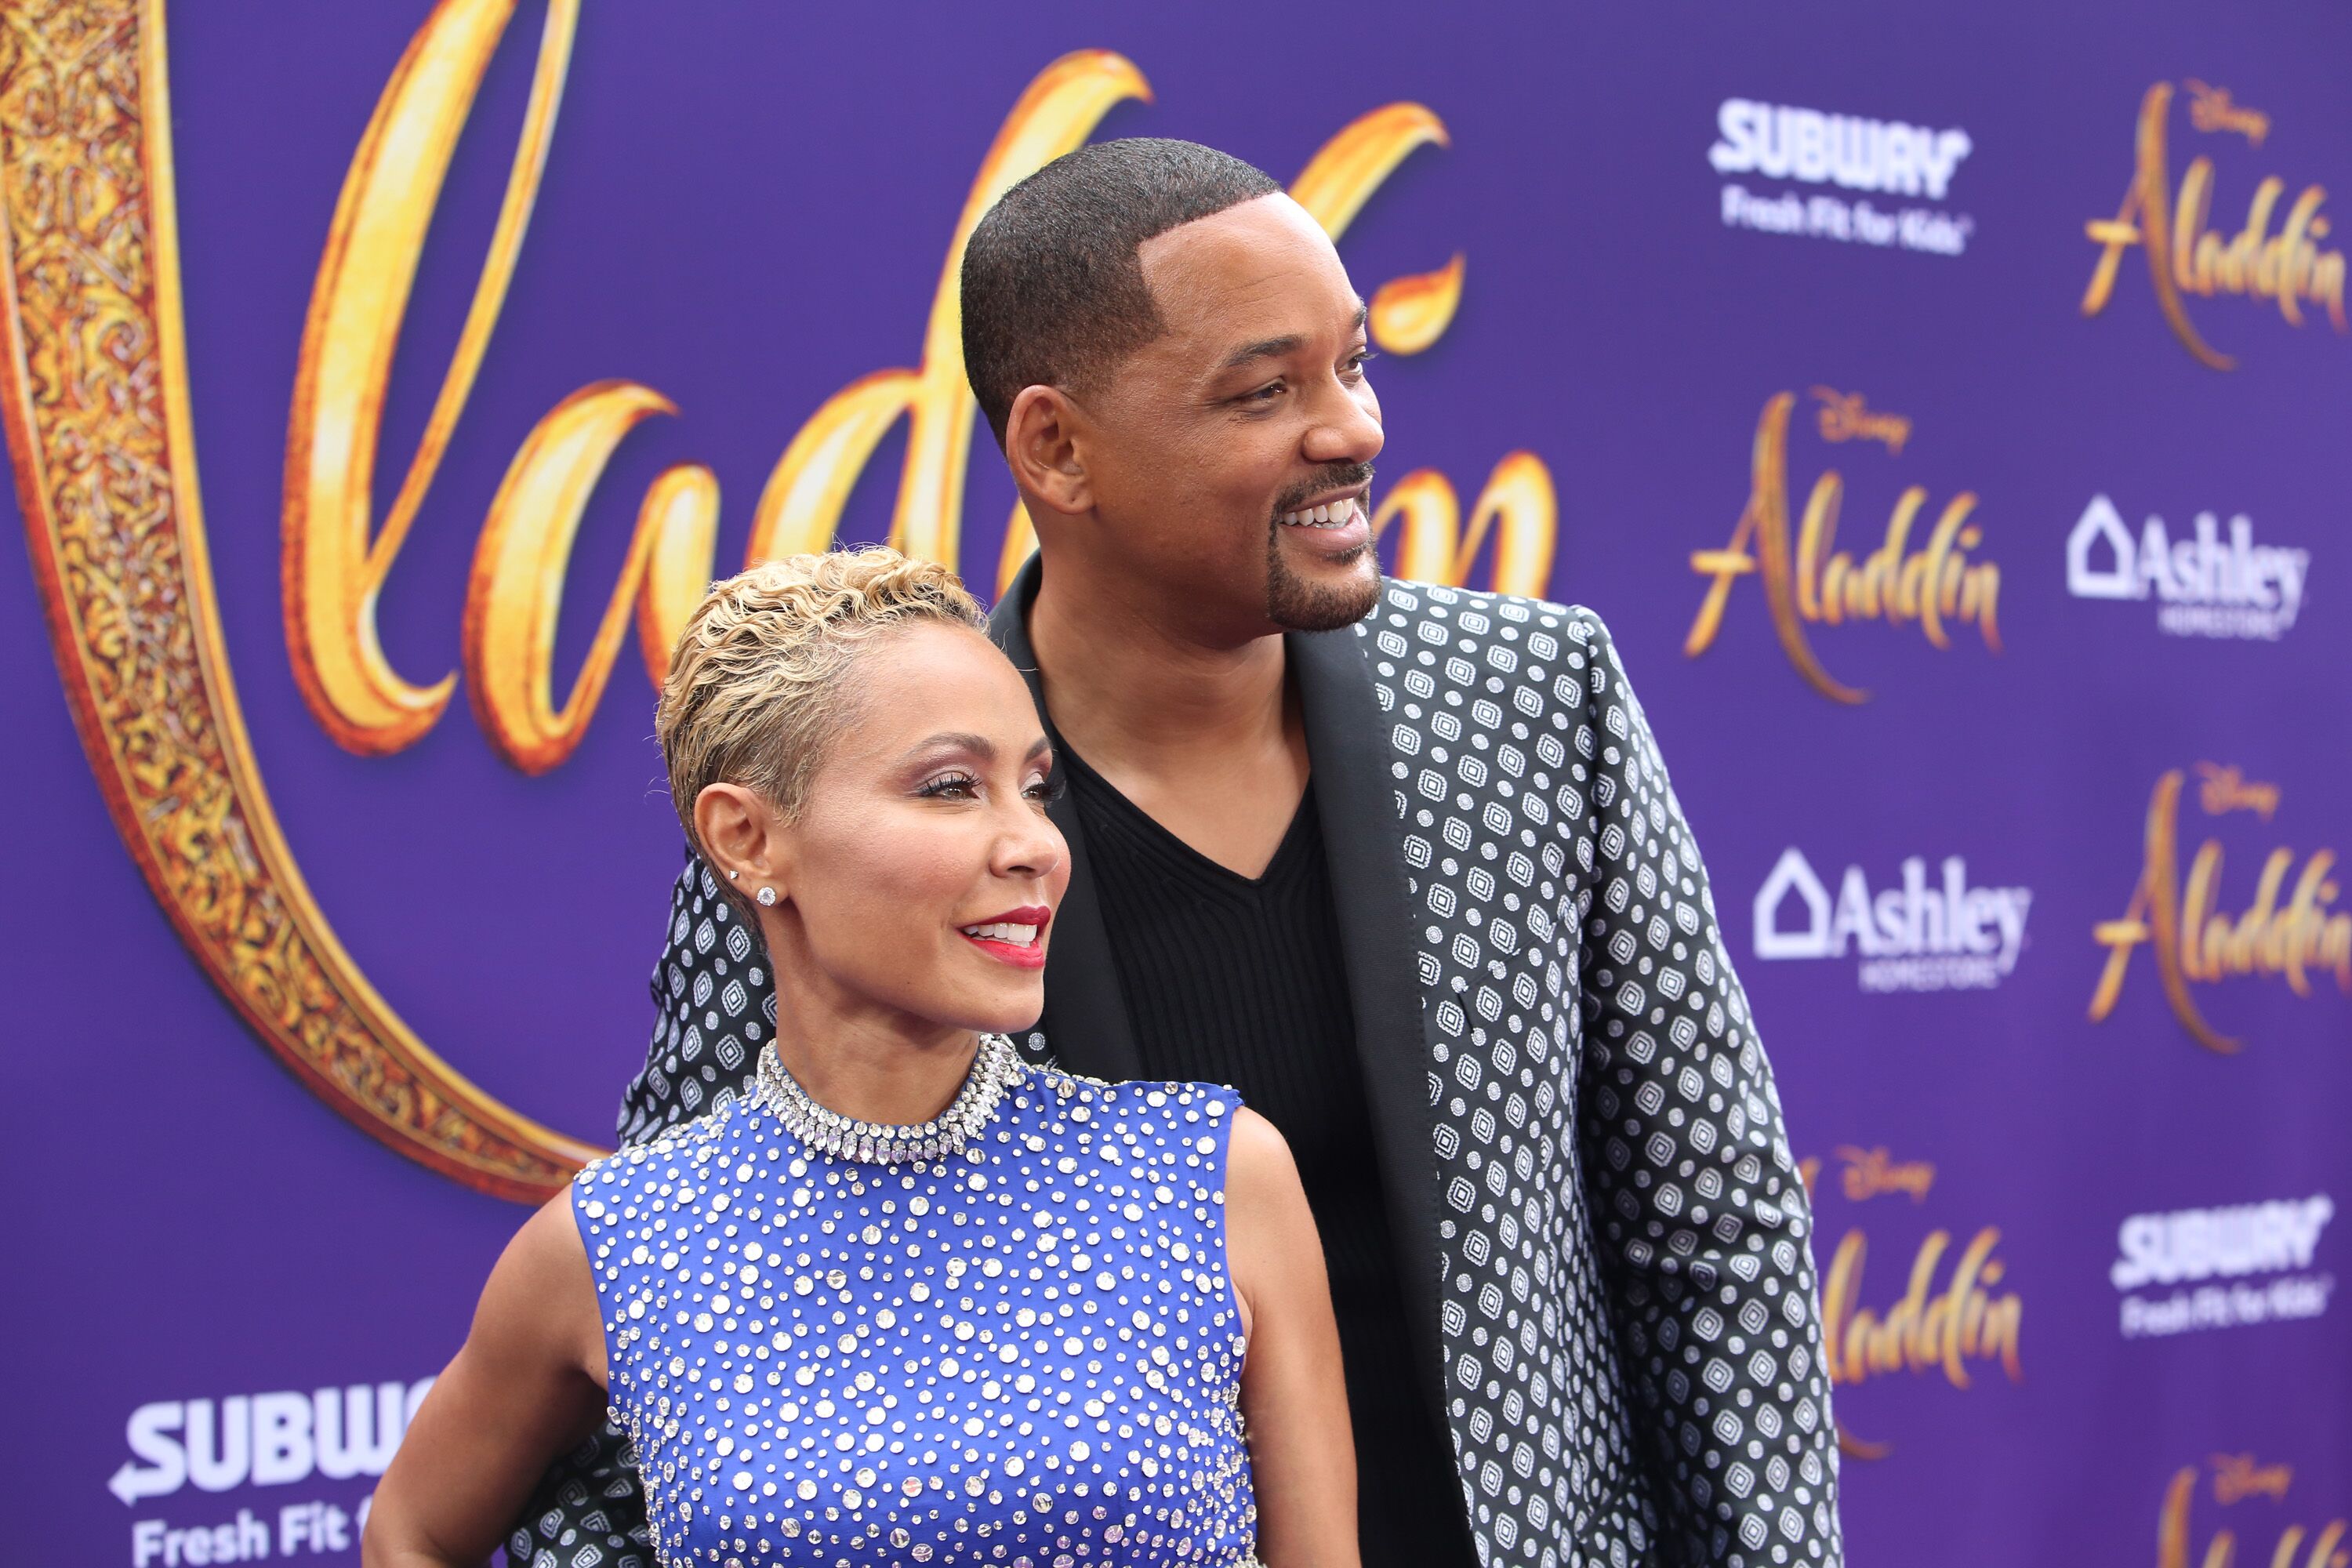 Jada Pinkett Smith (L) and Will Smith attend the World Premiere of Disney's "Aladdin" at the El Capitan Theater in Hollywood. | Source: Getty Images